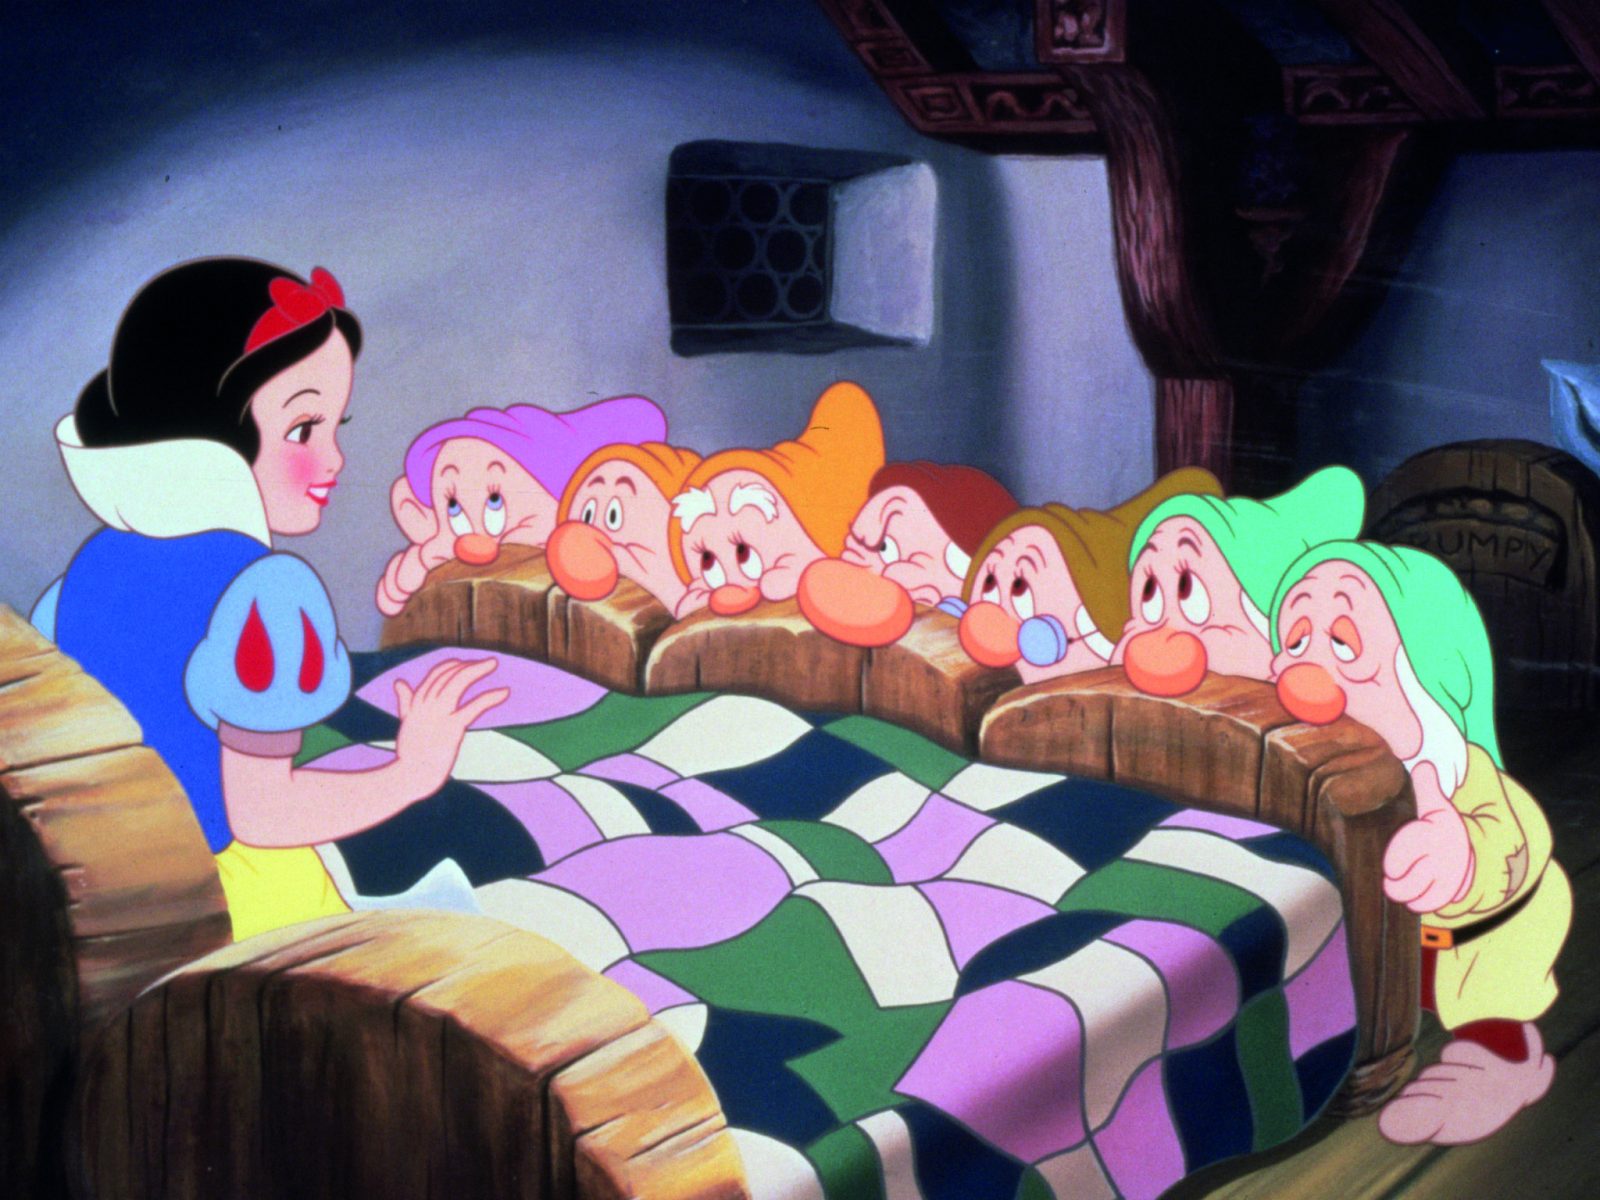 Don’t Call Yourself a Trivia Expert If You Can’t Get 15/20 on This General Knowledge Quiz Seven Dwarfs